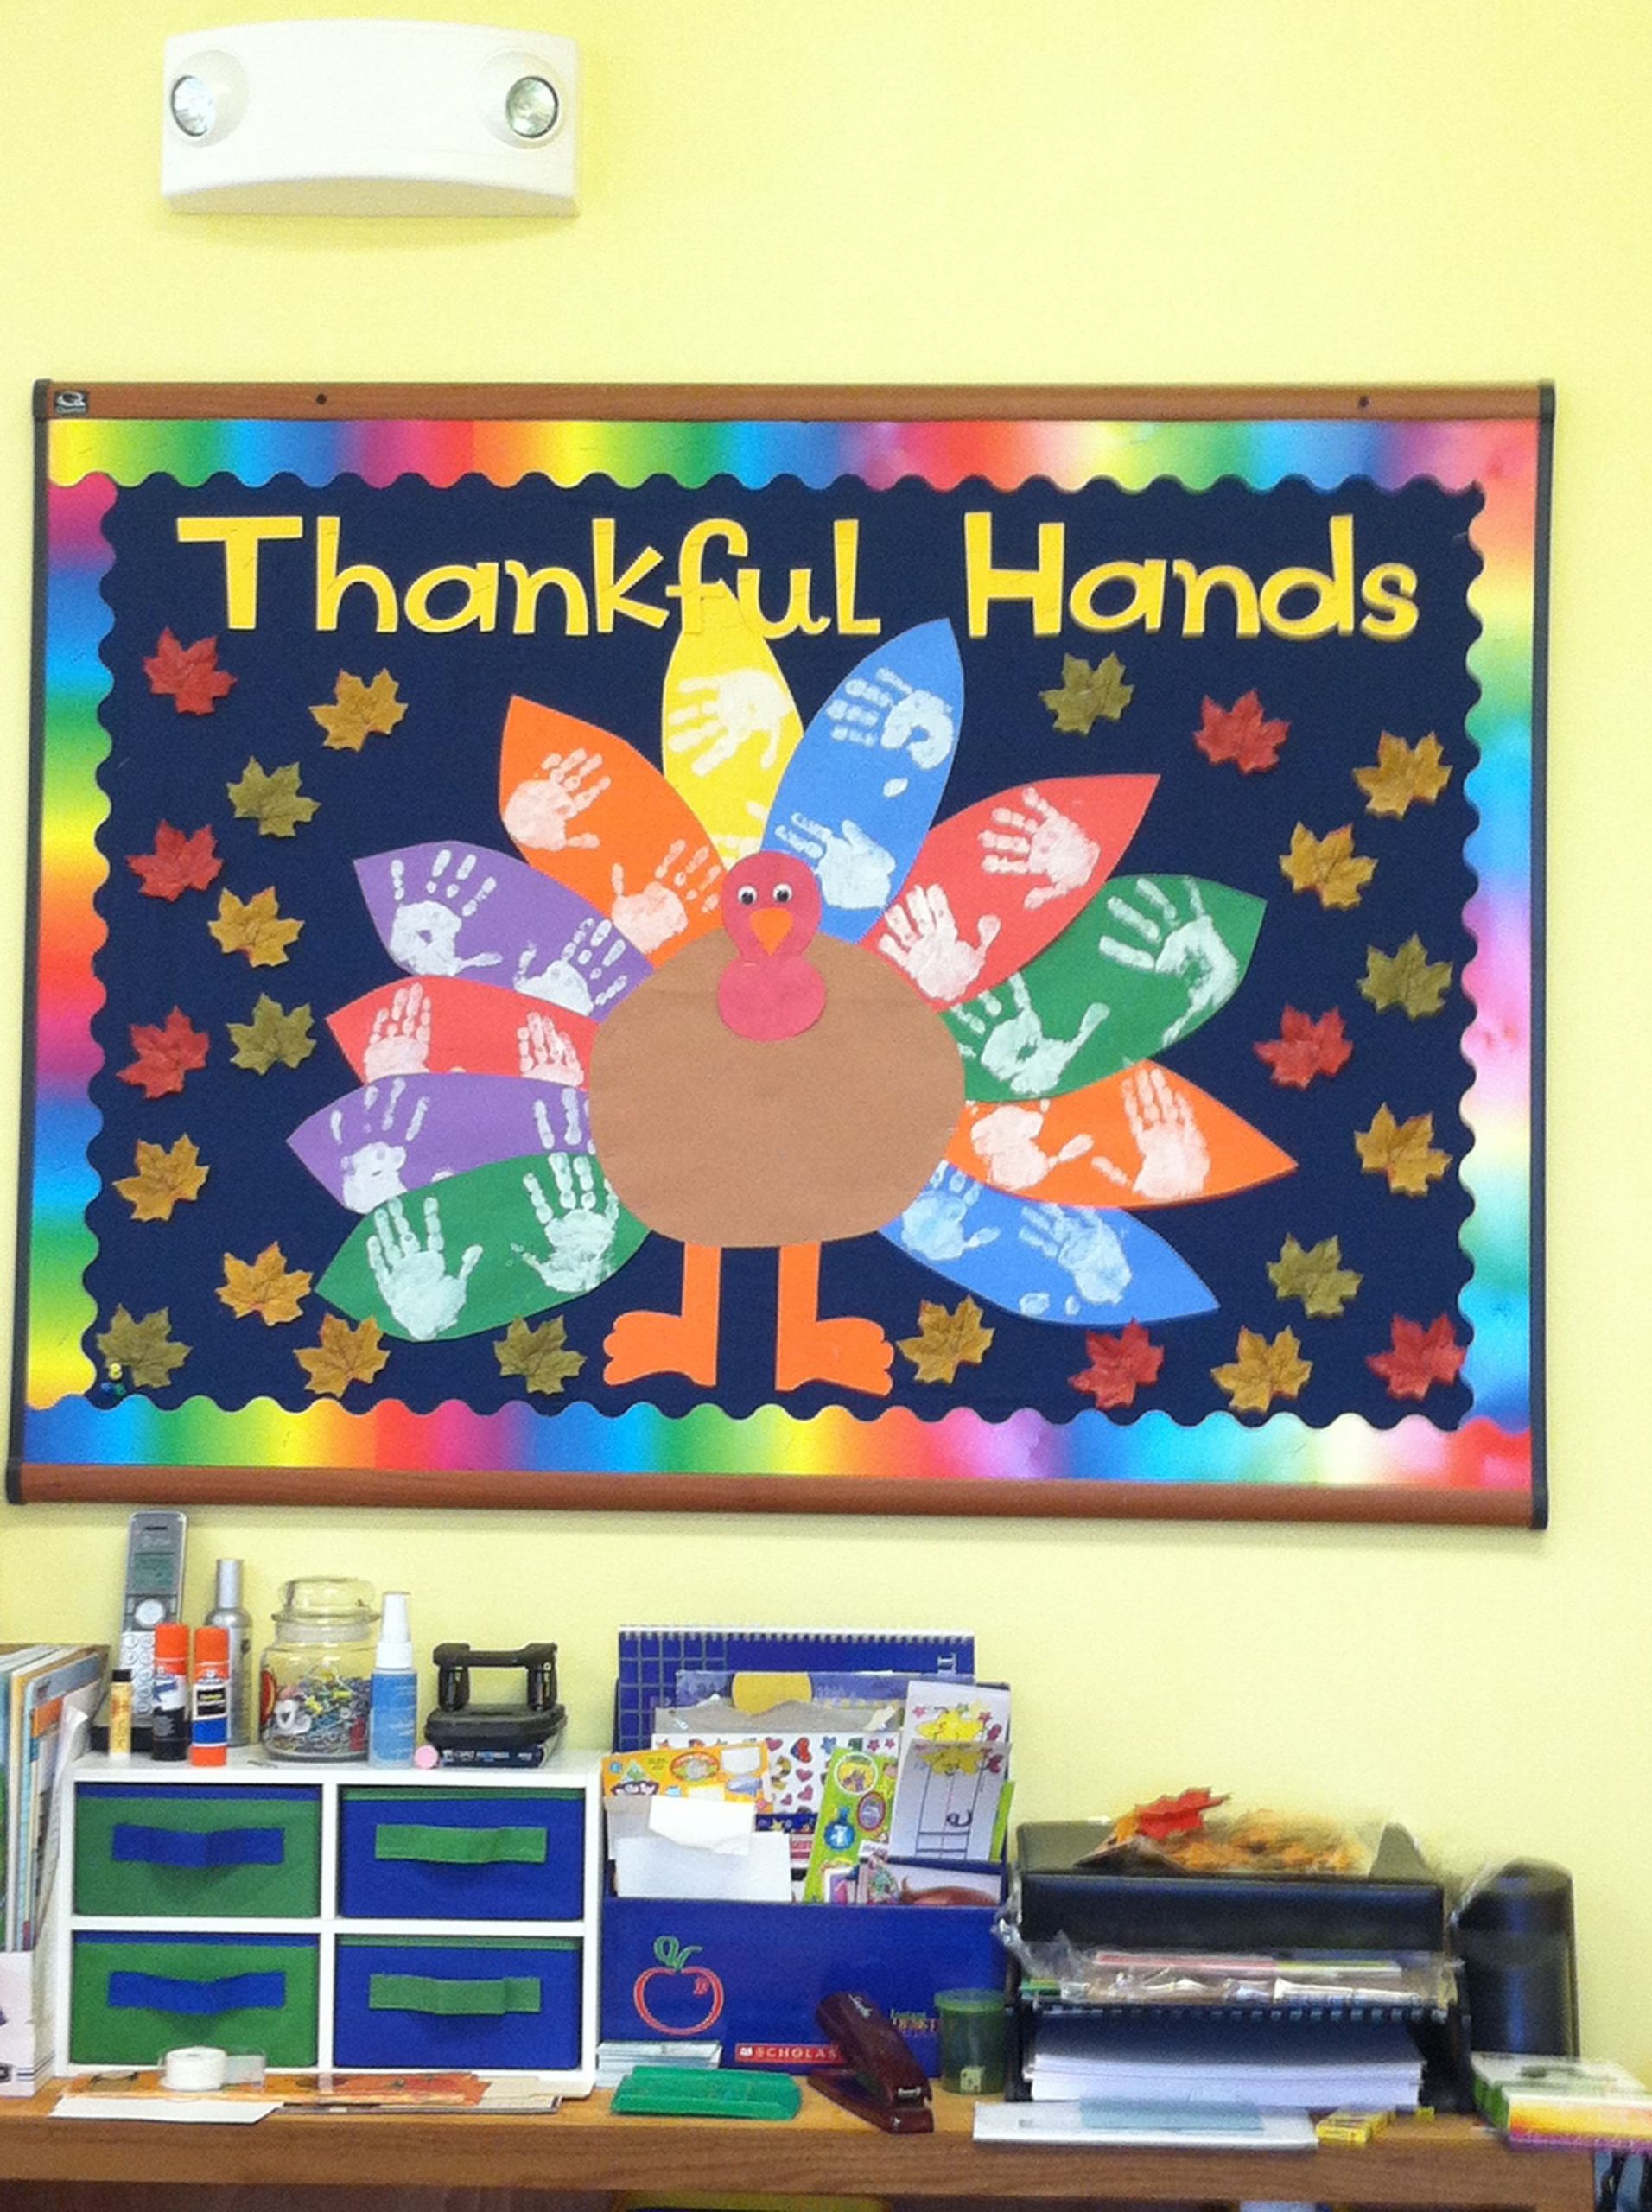 Thanksgiving Bulletin Board Ideas For Preschool
 Thanksgiving Bulletin Board CMs thankful notes on tail